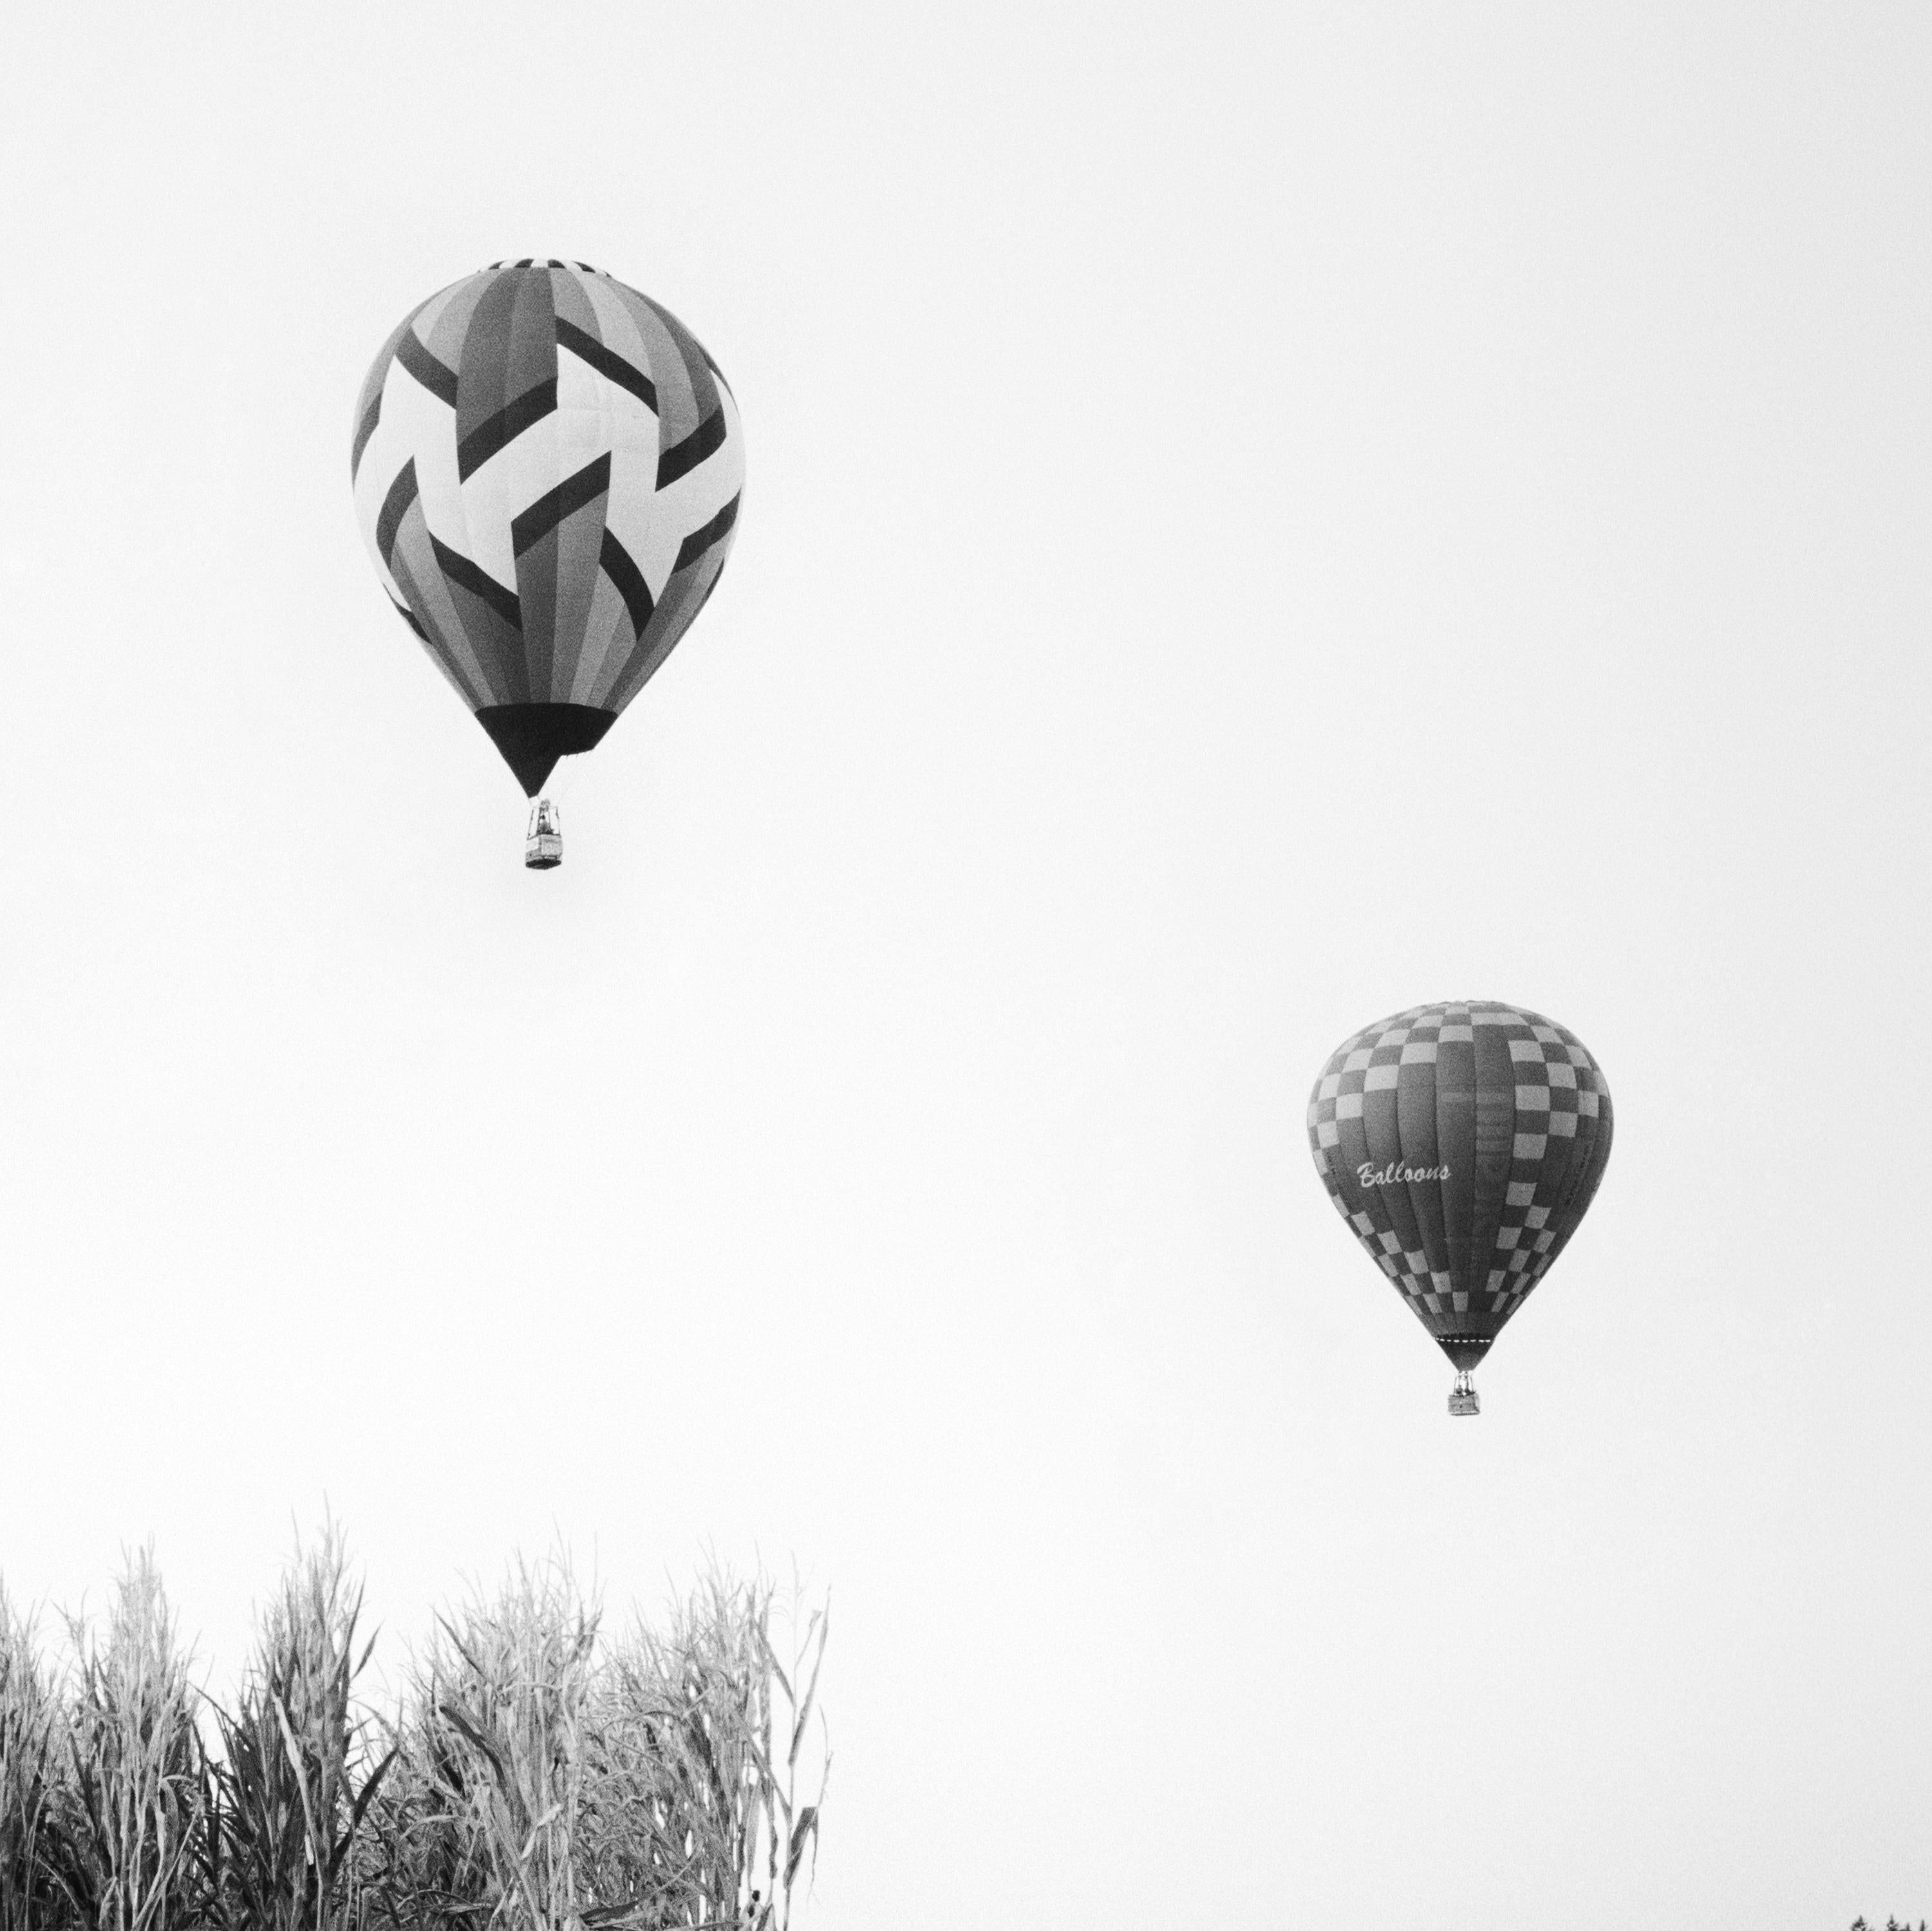 Black and white fine art photography print. Two hot air balloons over a corn field during the world cup in Austria. Archival pigment ink print, edition of 9. Signed, titled, dated and numbered by artist. Certificate of authenticity included. Printed